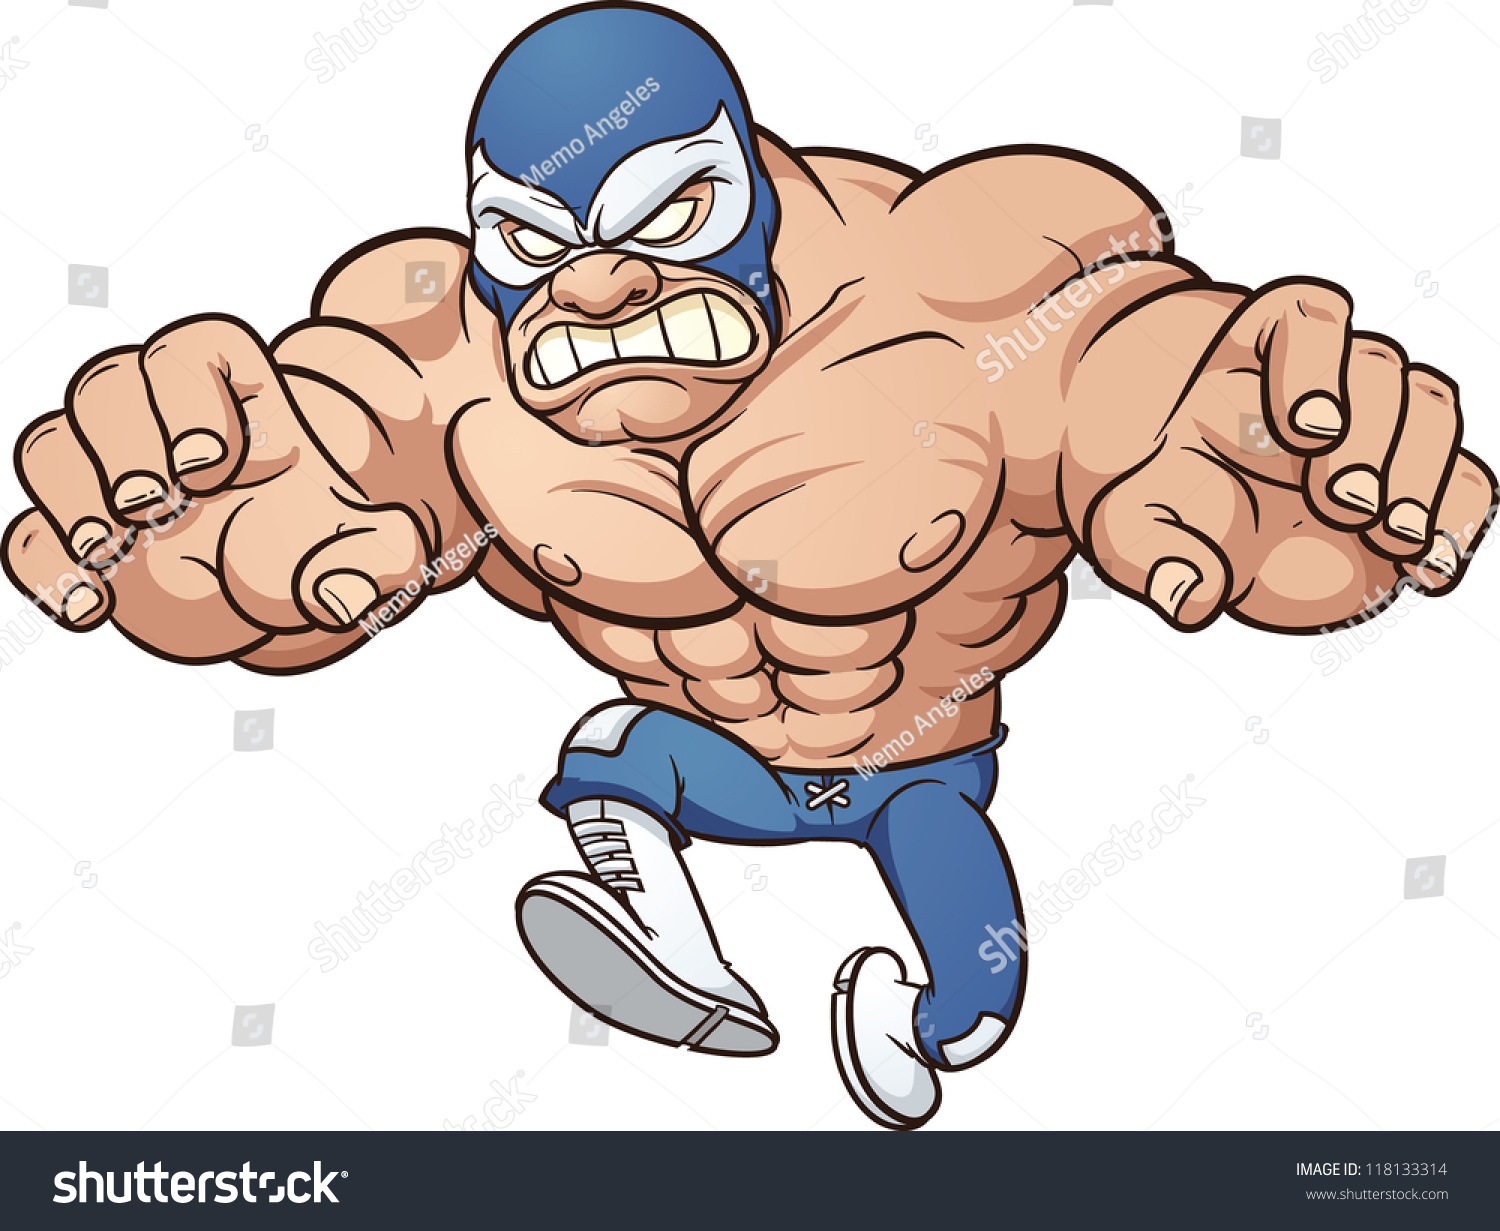 clipart wrestling pictures - photo #30